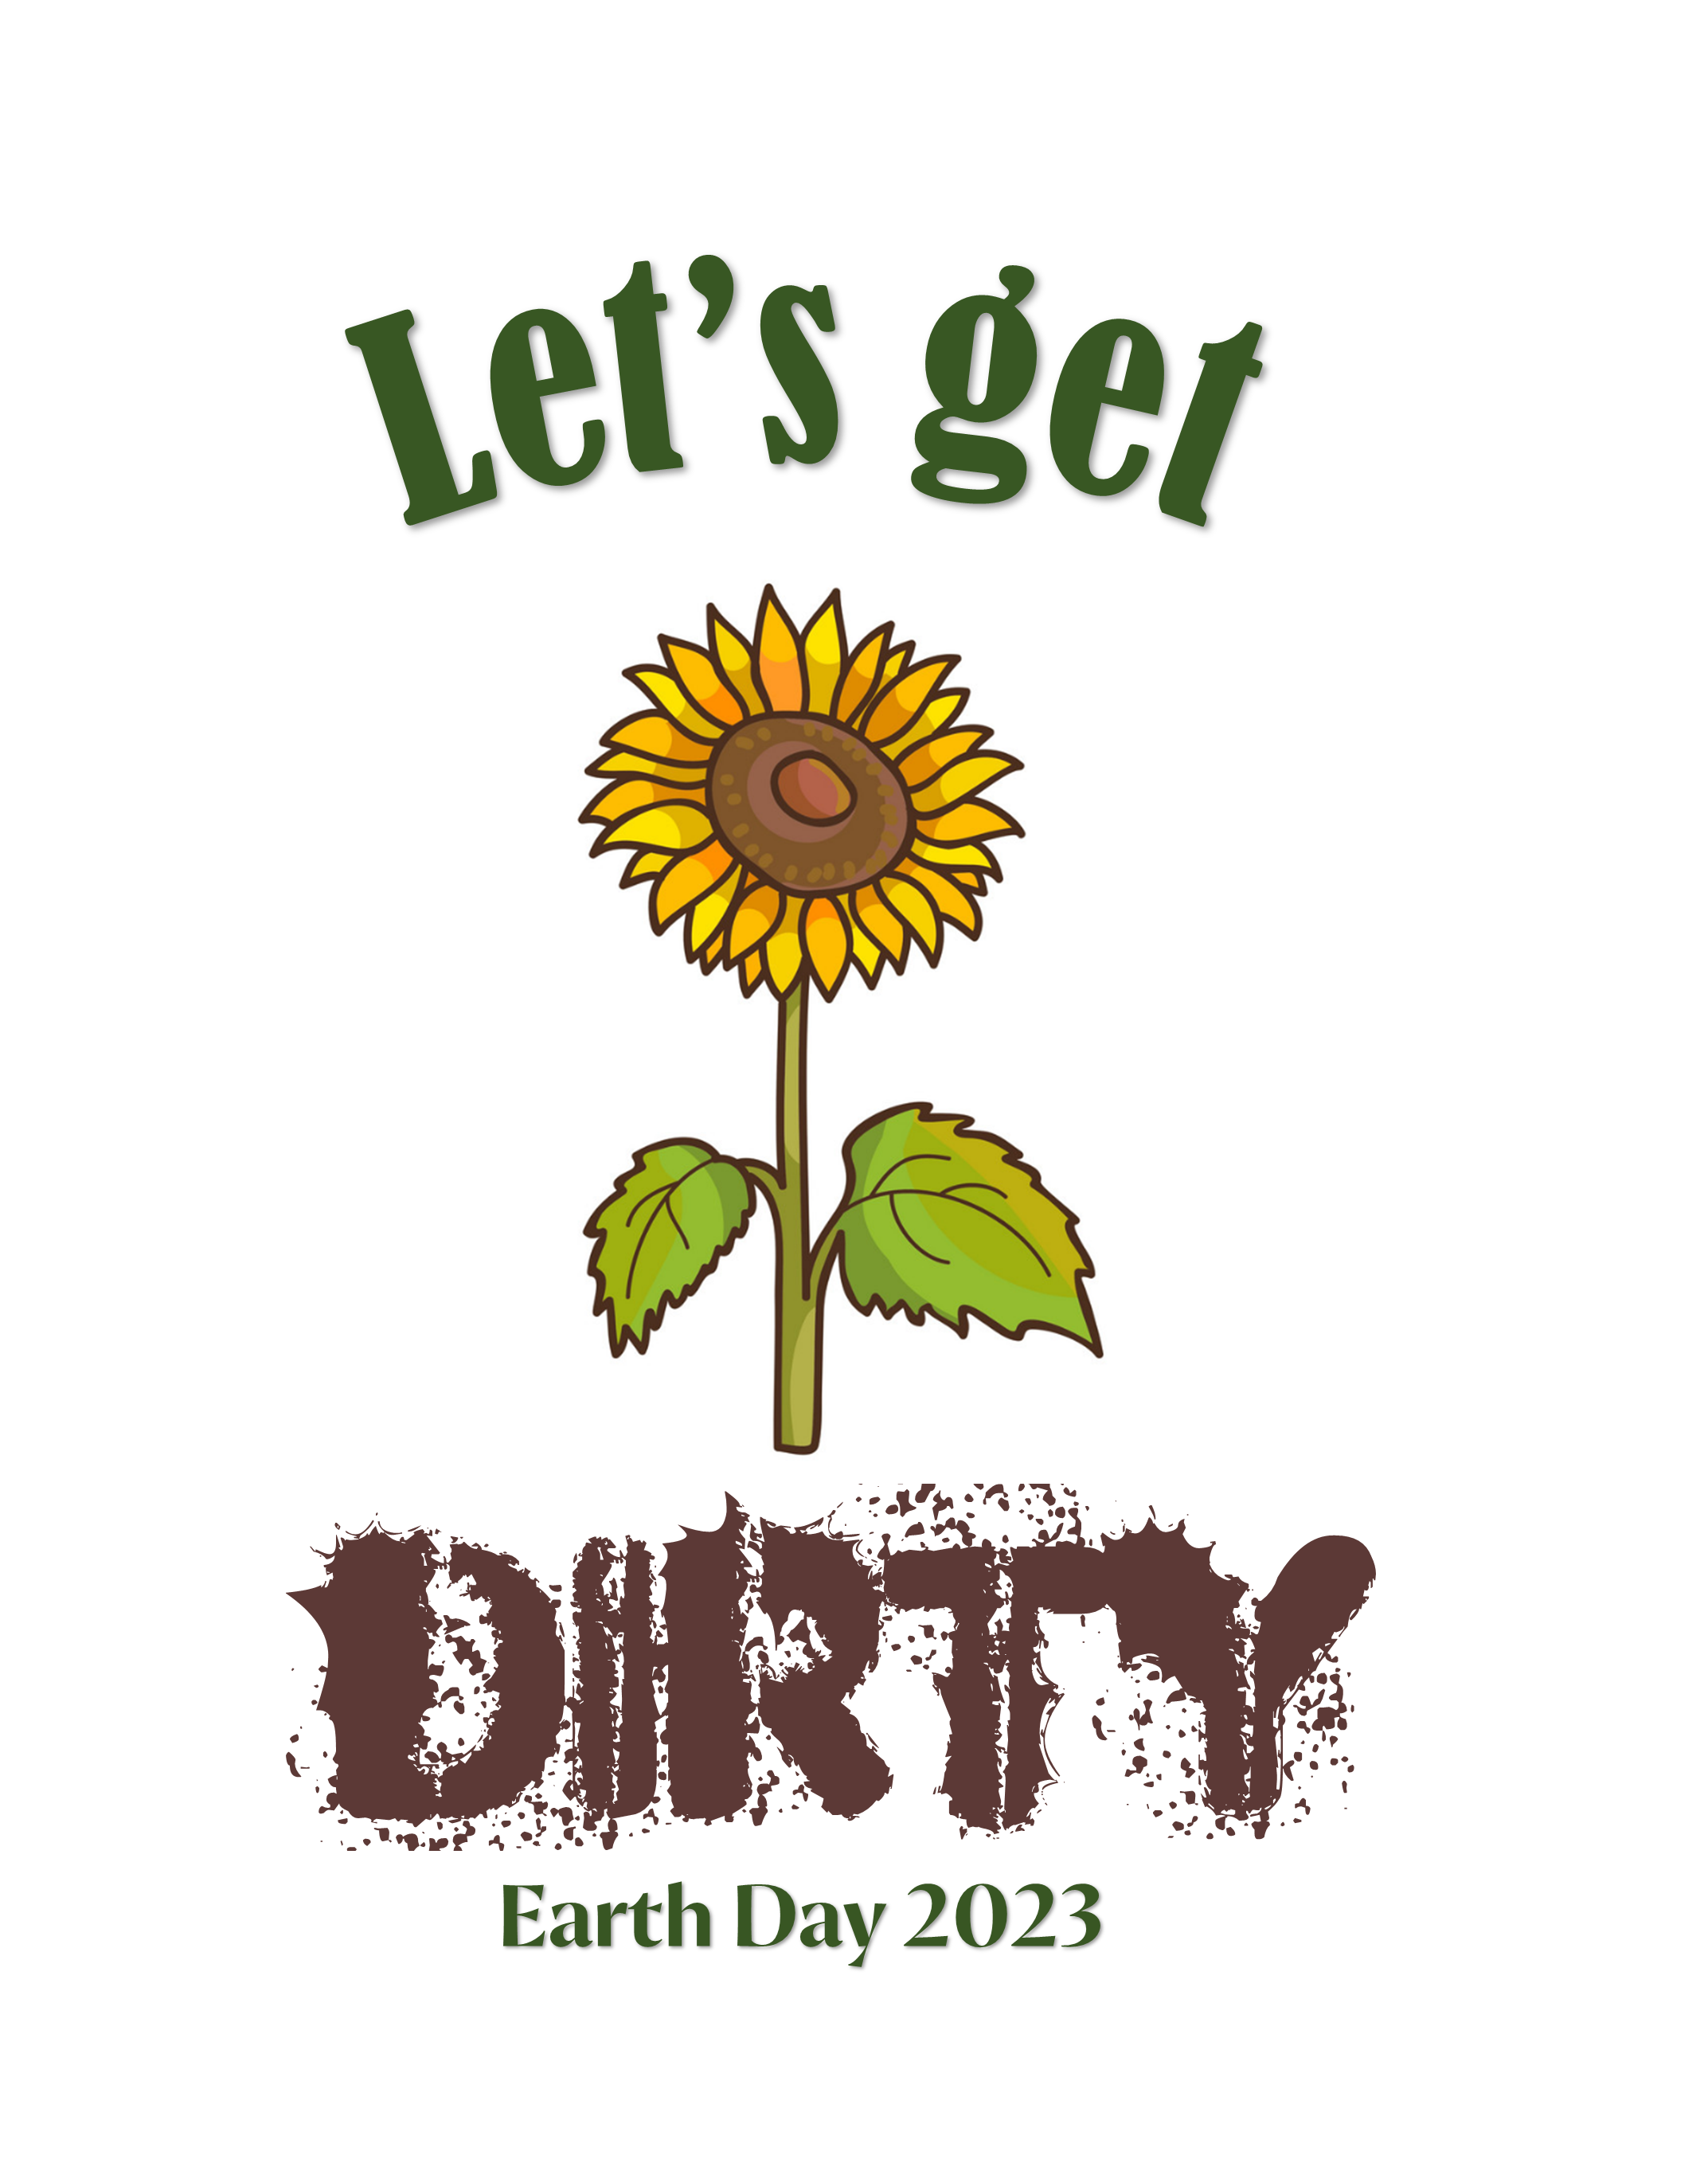 Let's Get Dirty! Earth Day 2022